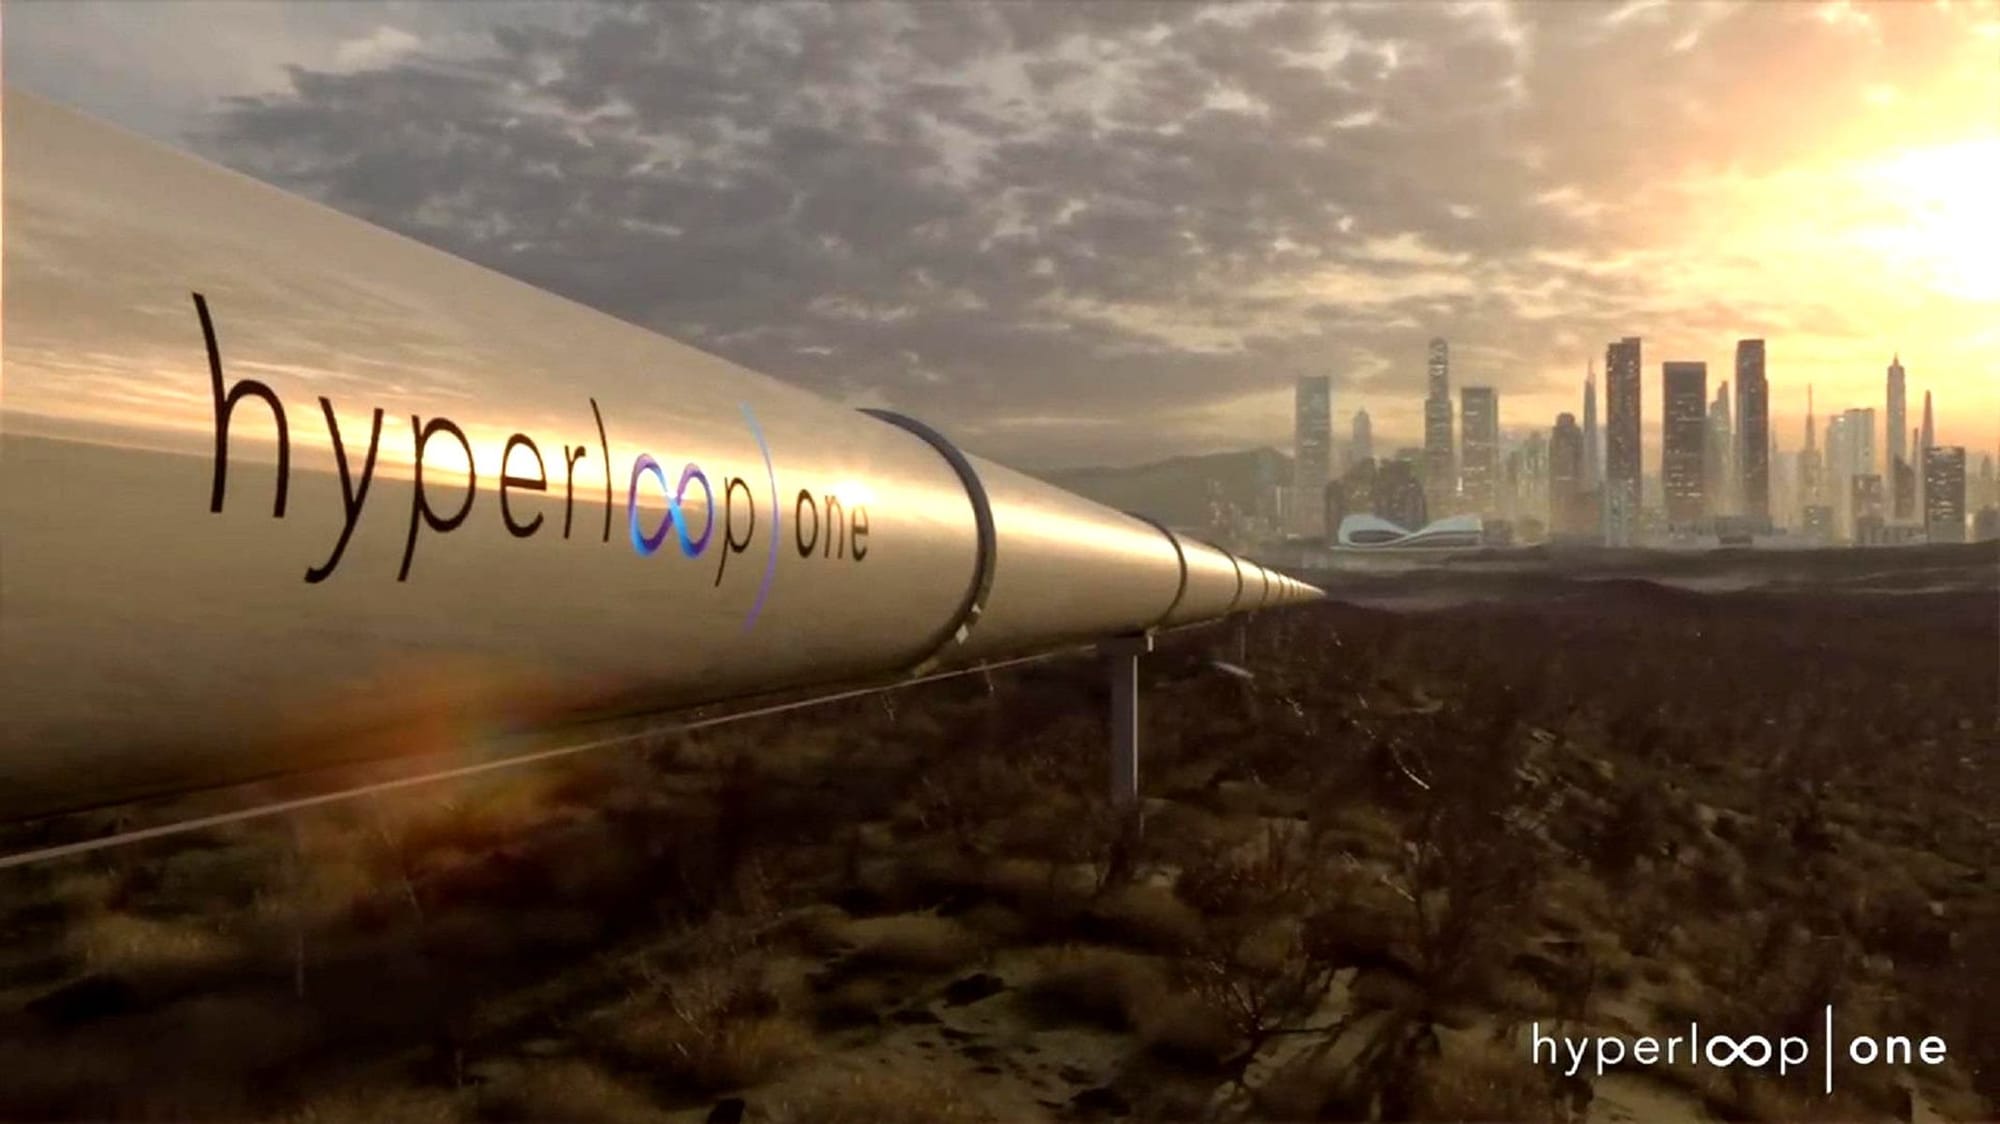 Top Stories: Hyperloop One is shutting down its operations